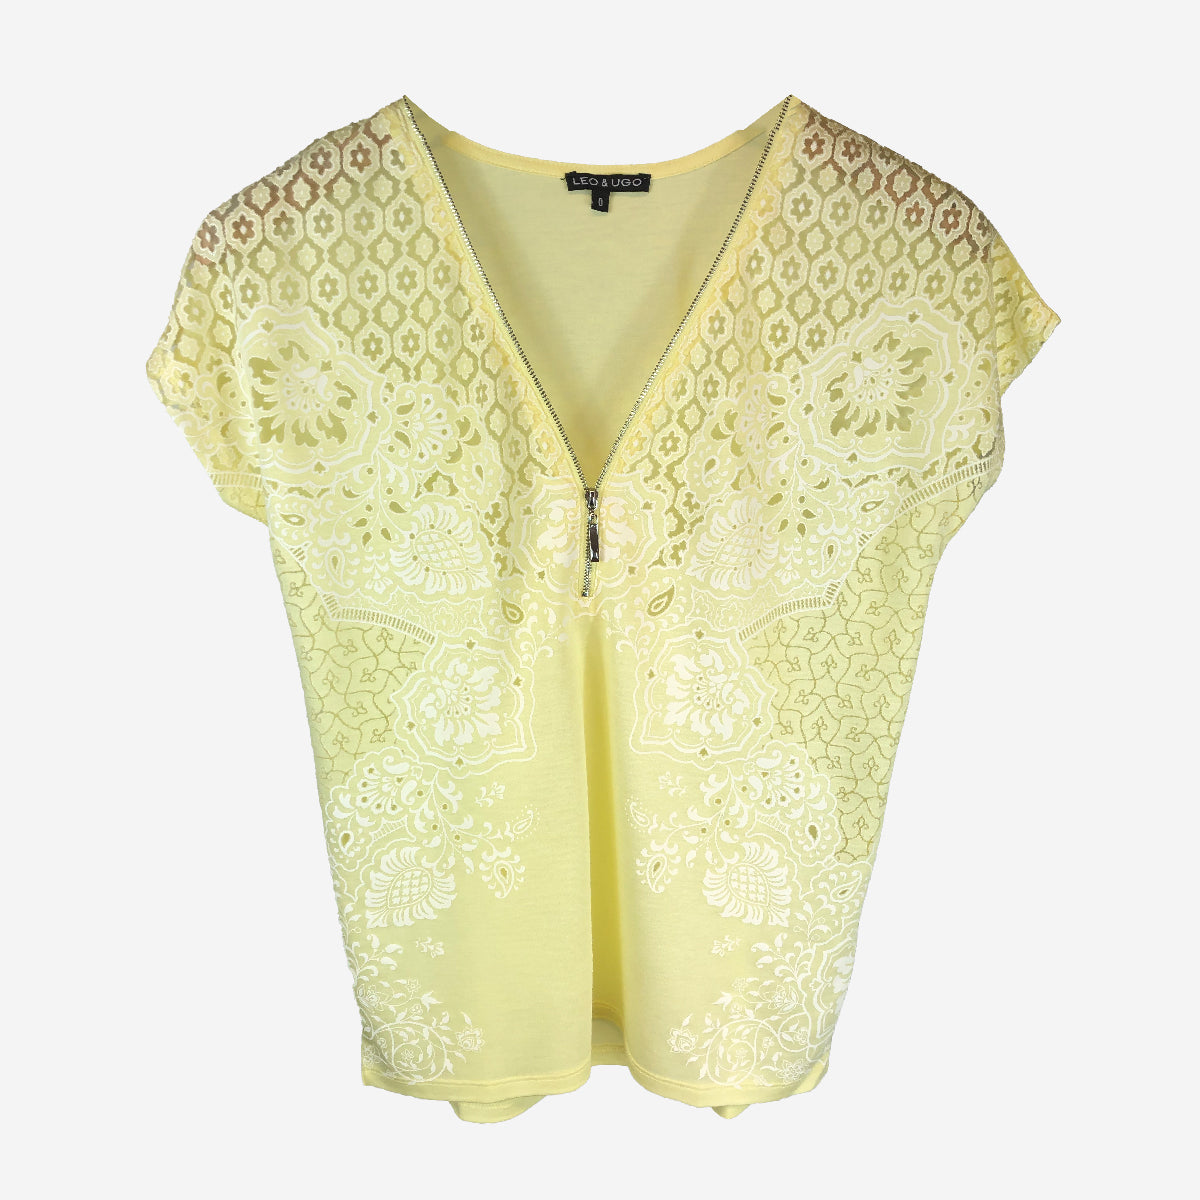 SLEEVELESS TOP WITH PRETTY LACE PATTERN AND ZIP DETAIL TO THE FRONT